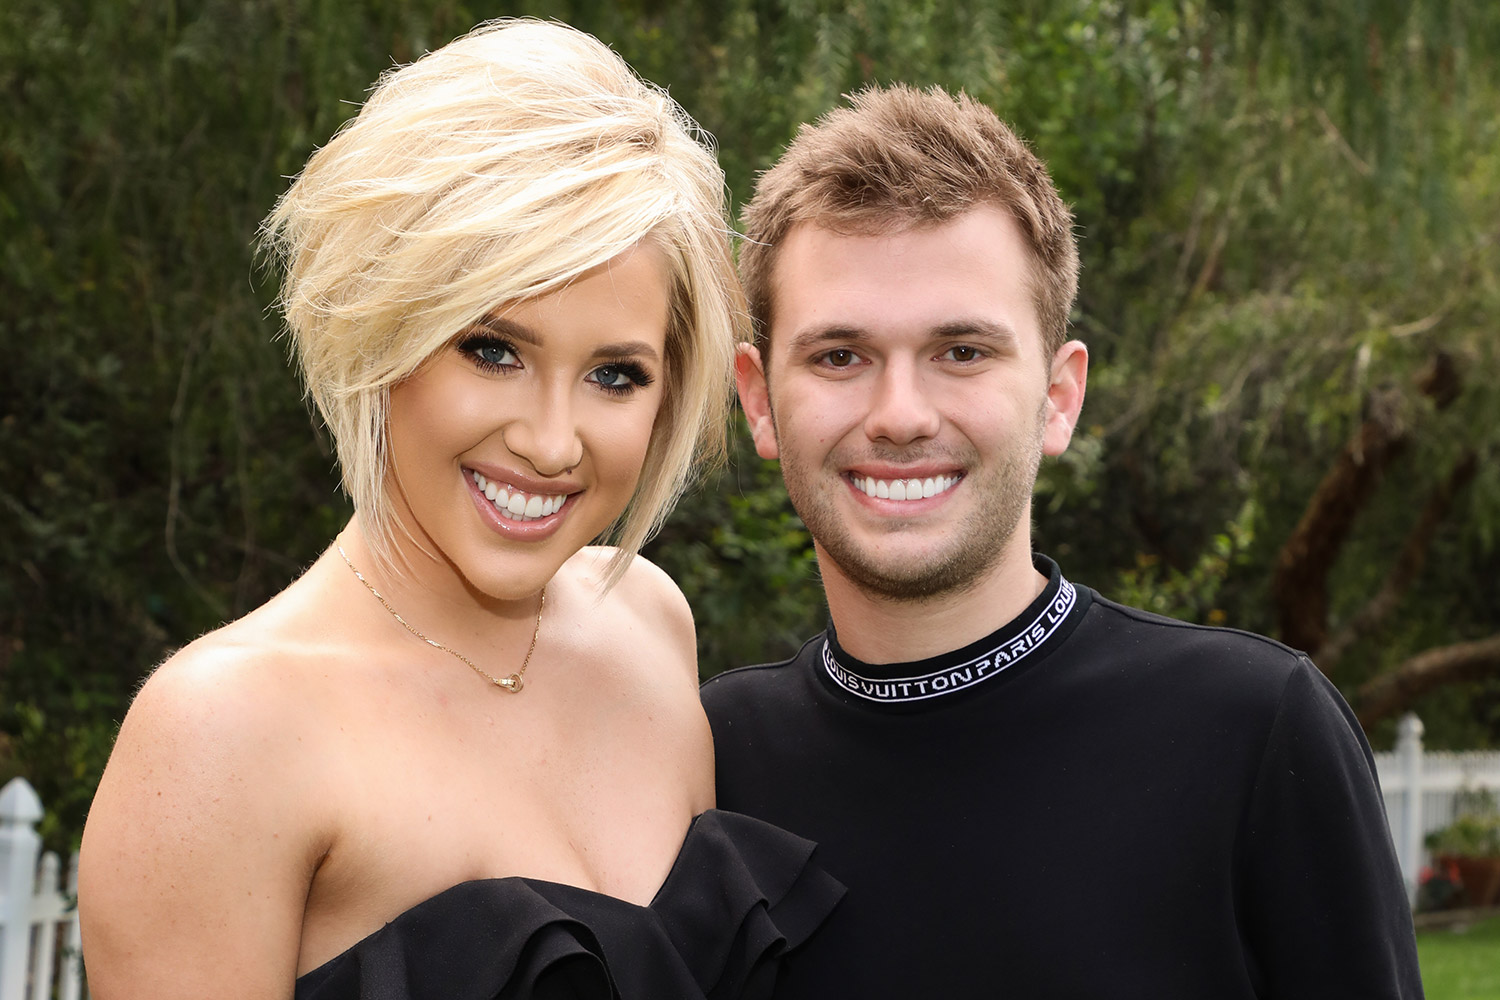 Growing Up Chrisley Fans Demand Removal of a Cast Member